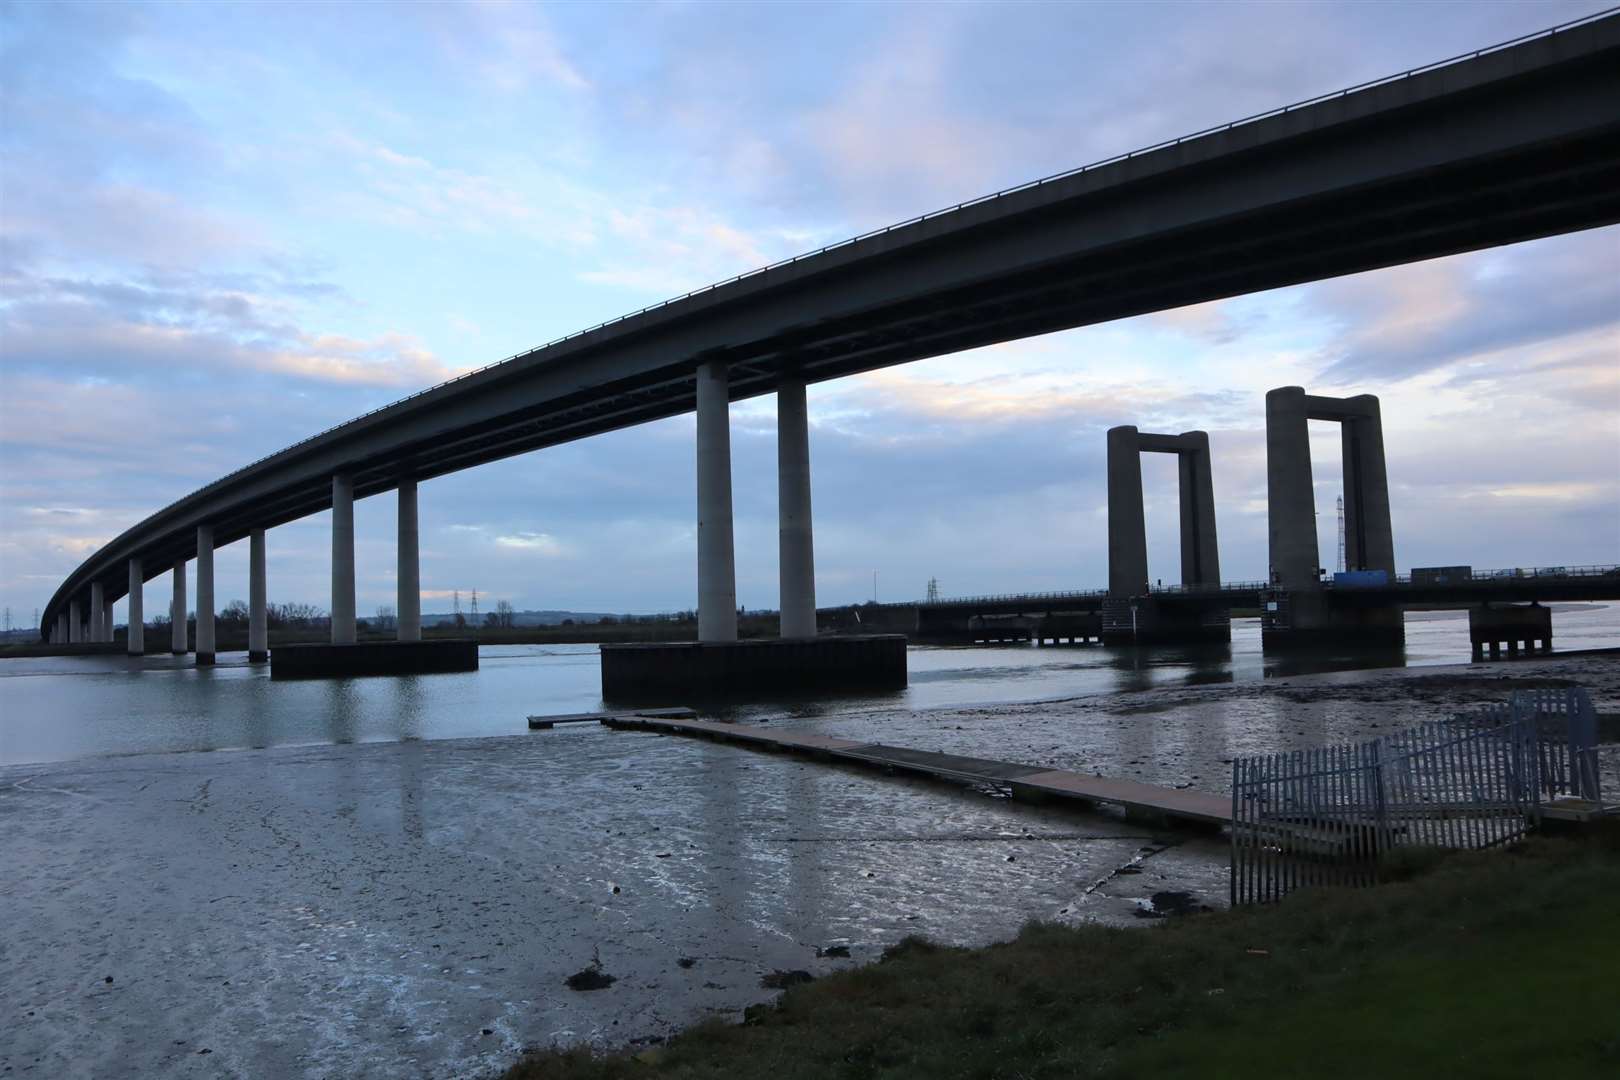 The Kingsferry Bridge dwarfed by the Sheppey Crossing seen from the mainland side of The Swale near Iwade